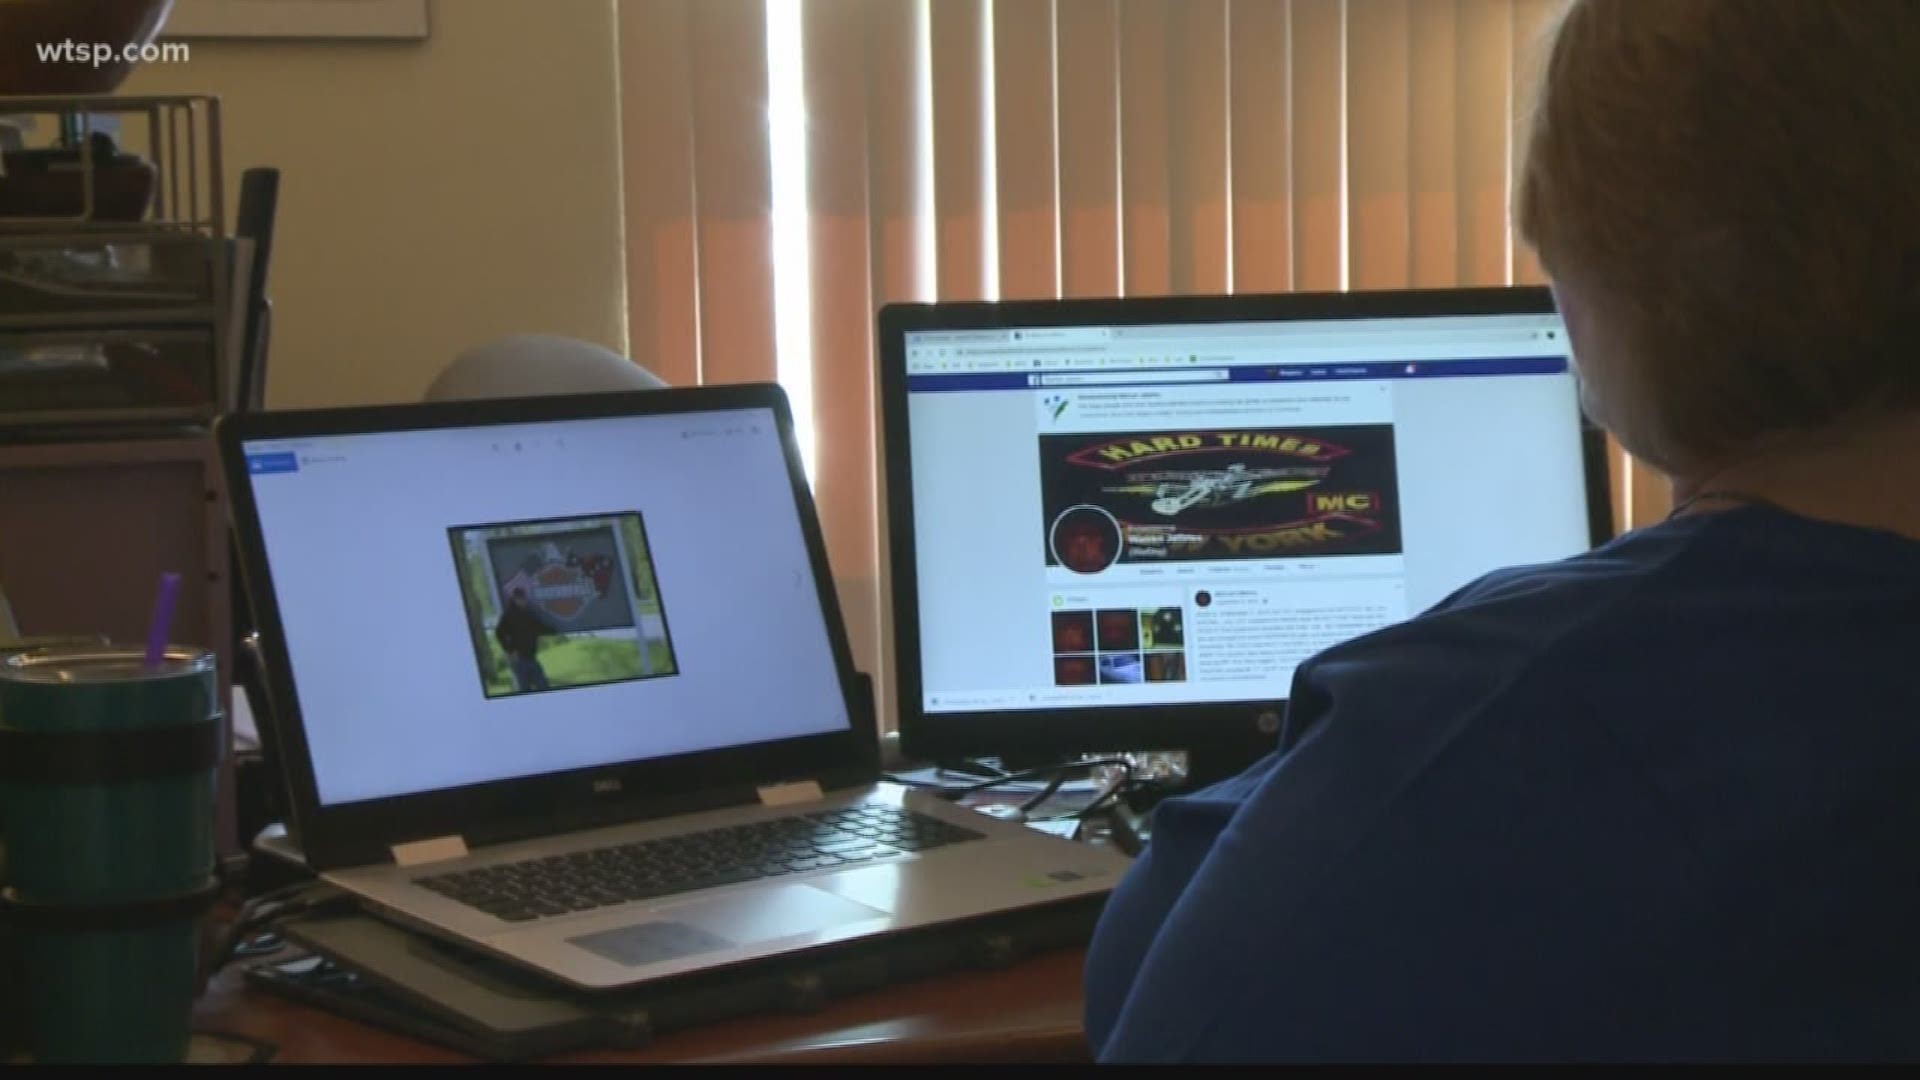 For many, their entire lives are posted on social media. But, what happens when you die? One woman said she needs access to her late brother’s Facebook page, but Facebook won’t give it to her. She decided to Turn to 10 for help.

“He was so happy that day,” Margaret Kennedy said. 

A quick glimpse at Warren Jeffries' Facebook page shows the love he had for his parents and his friends.

It’s those memories his sister wants to hold on to. She said her brother died unexpectedly in January.